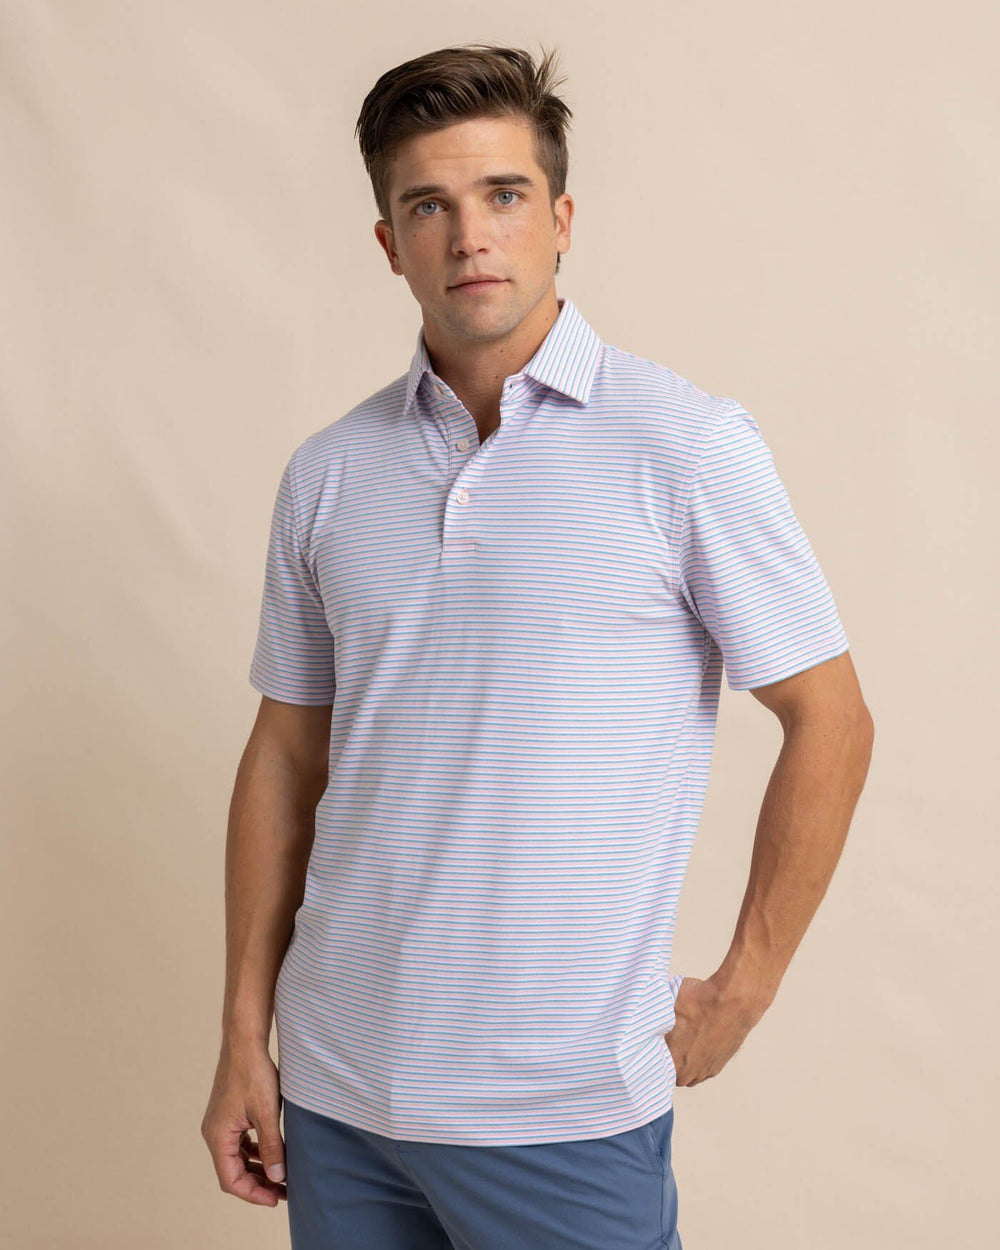 The front view of the Southern Tide Ryder Heather Halls Performance Polo by Southern Tide - Heather Pale Rosette Pink